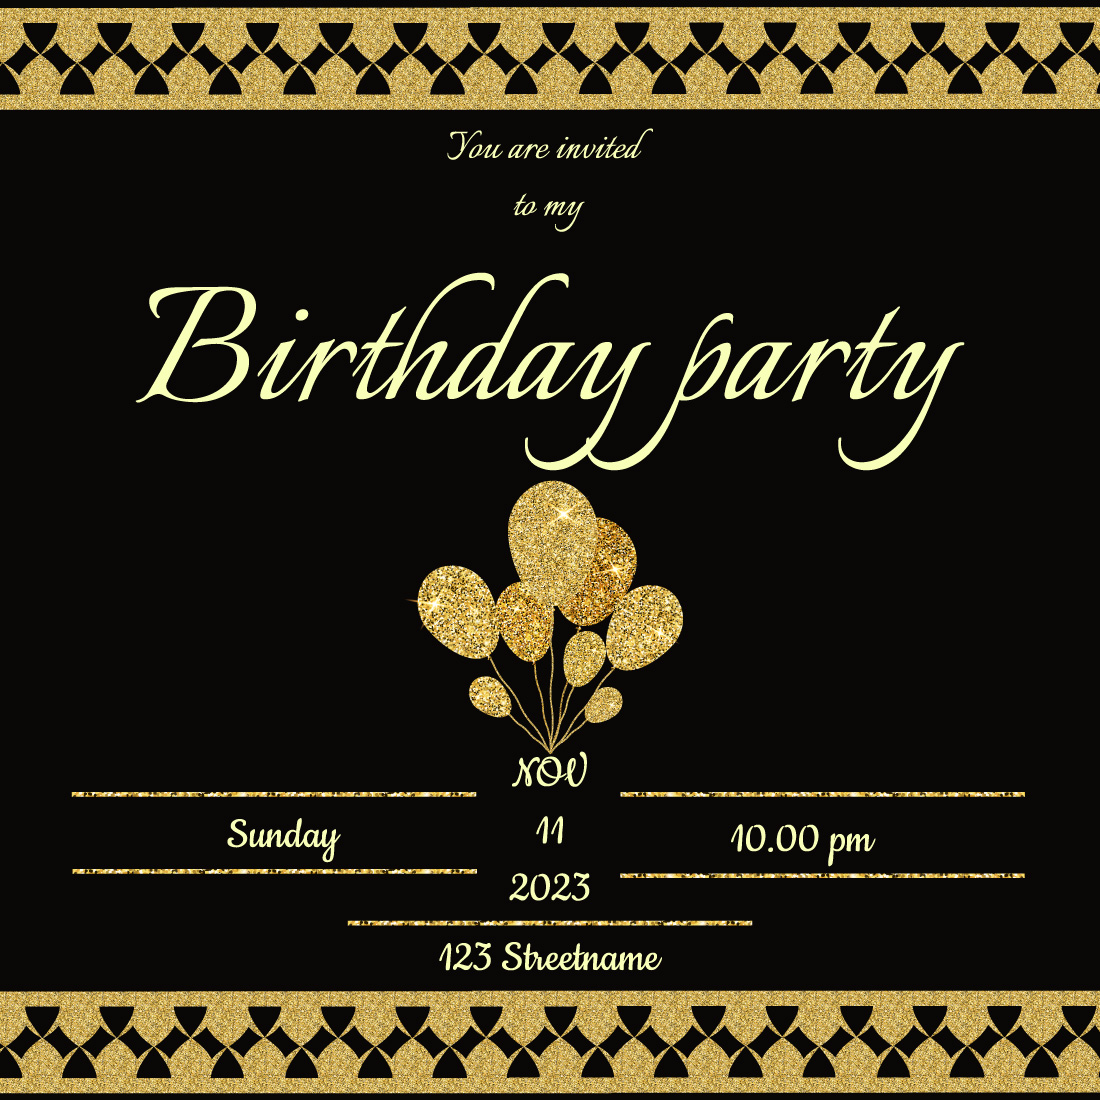 Birthday invitation card with golden sparkles, balloons and inscription cover image.